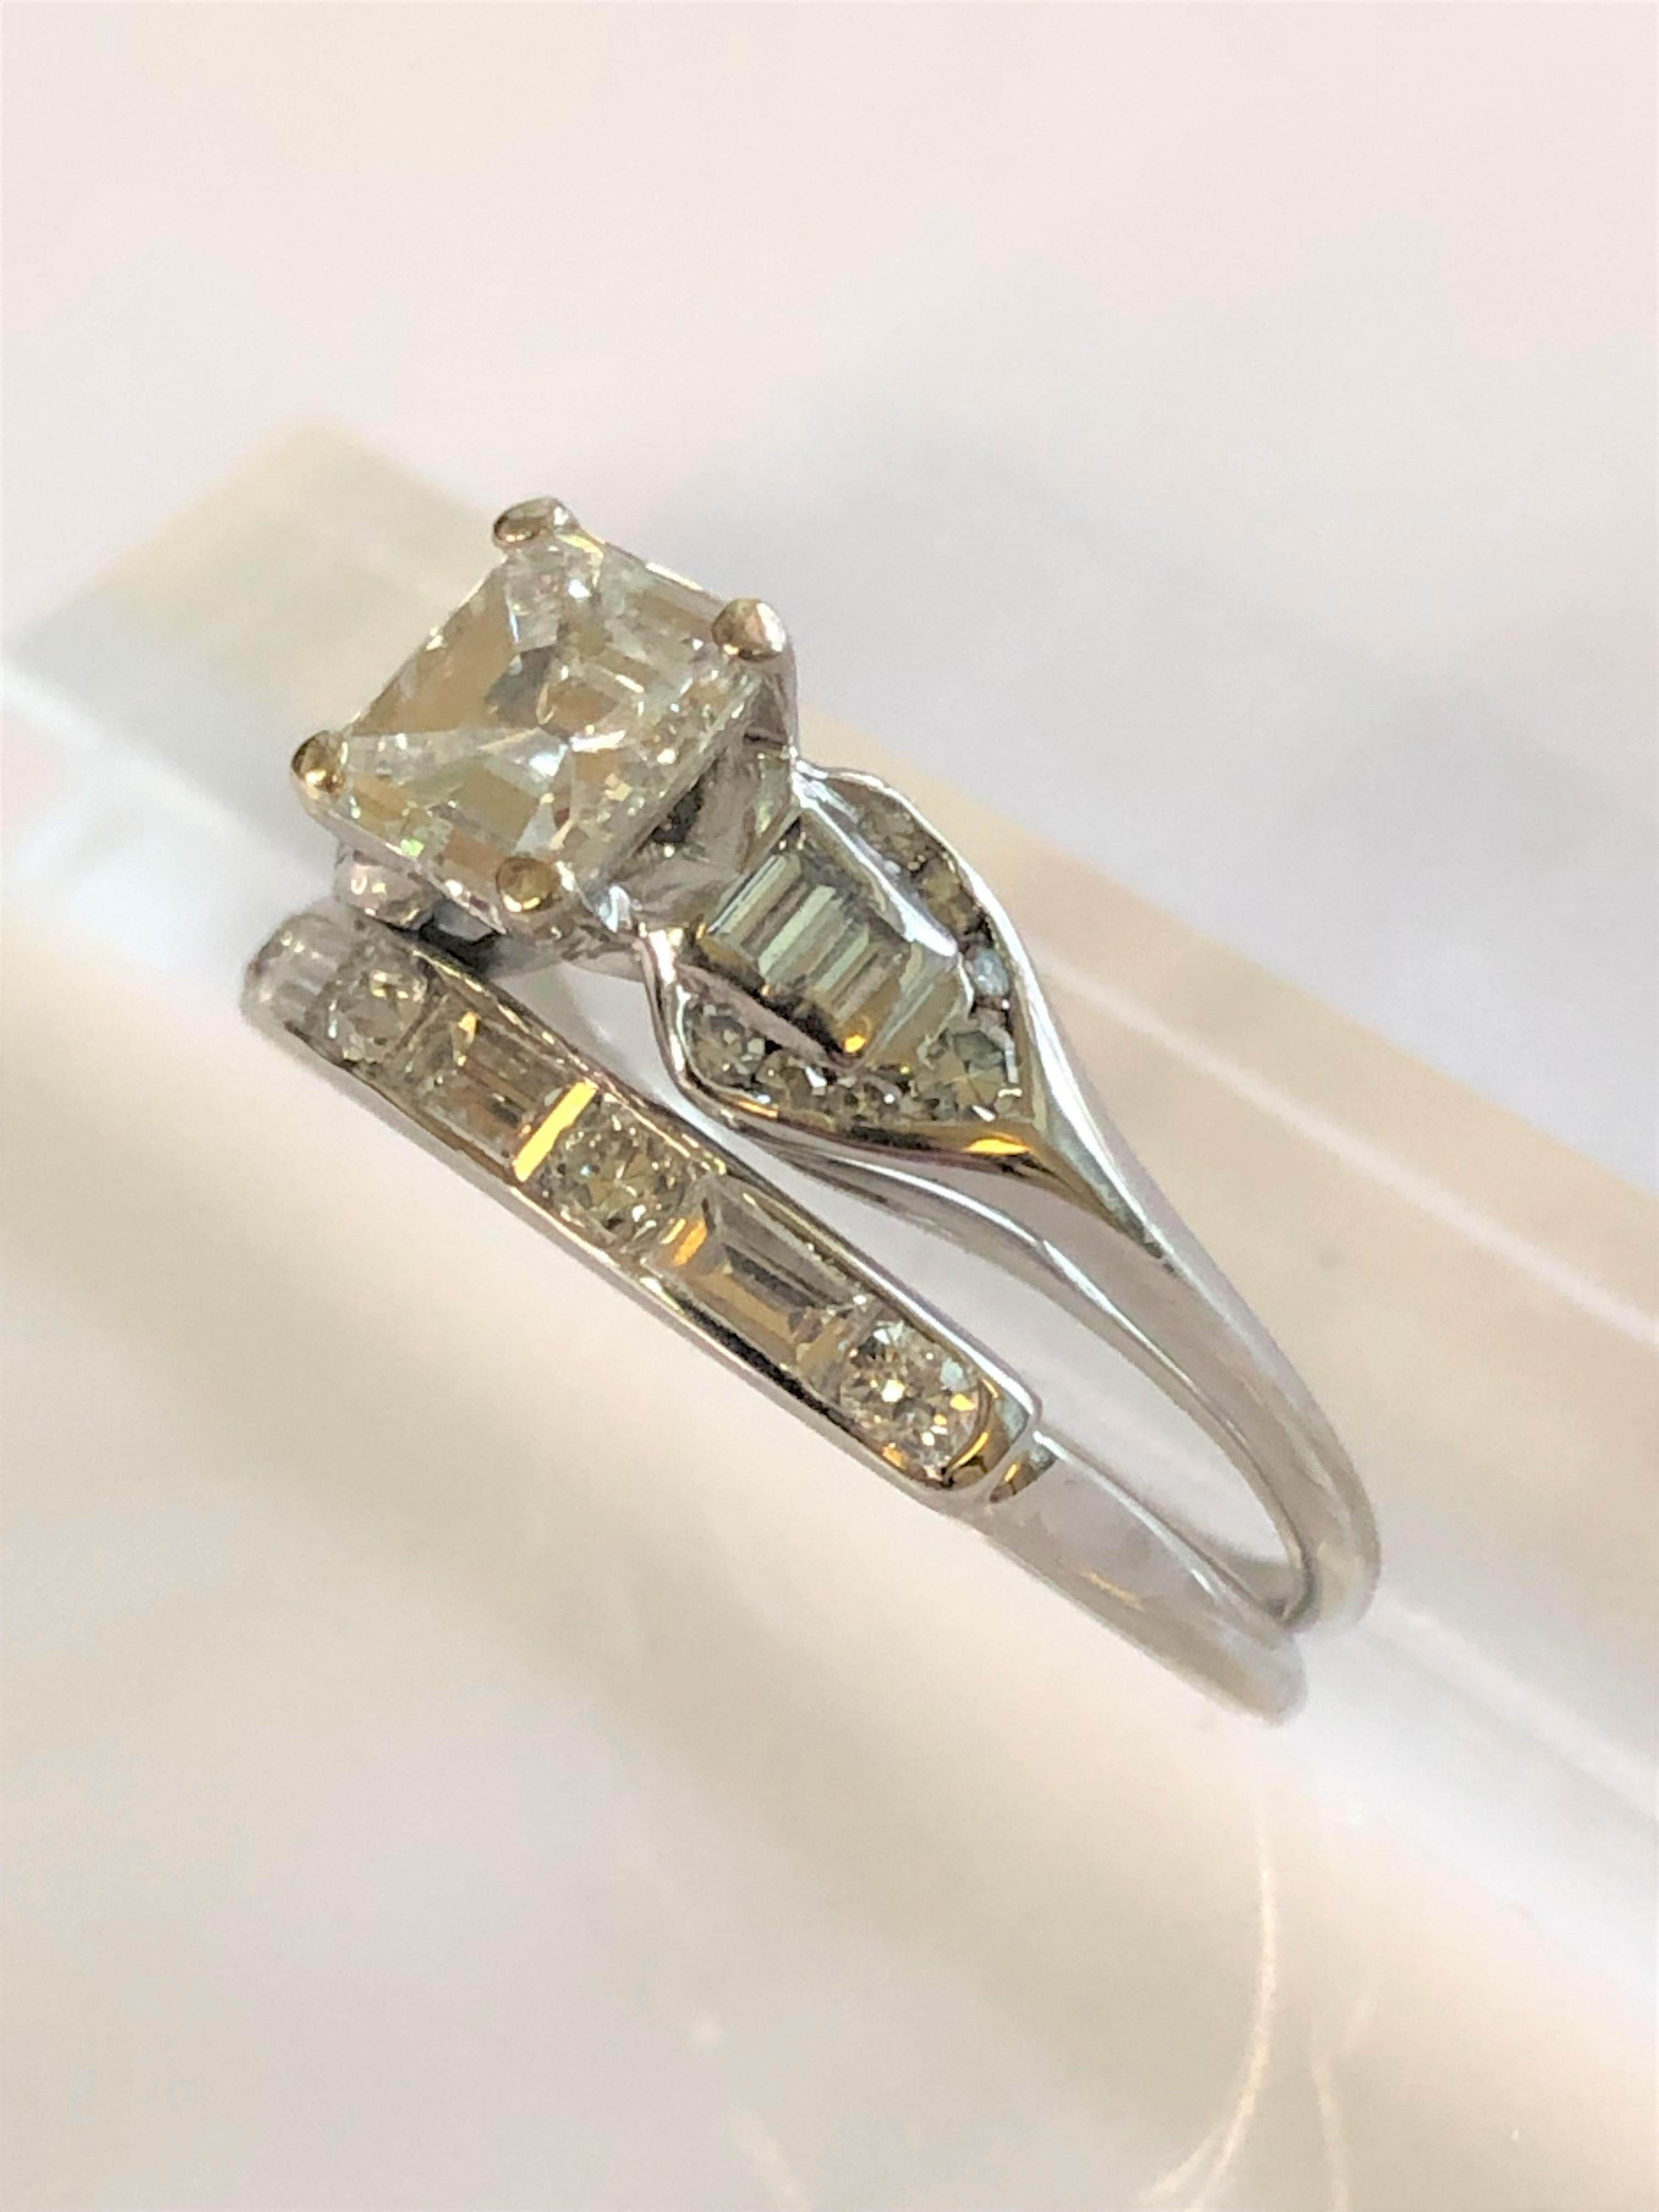 This engagement ring and wedding band are beautiful and have has lots of detail and sparkle!
Engagement ring and wedding band are soldered together; can be separated, if desired.
Engagement Ring, approximately 2.12 total diamond weight.
    